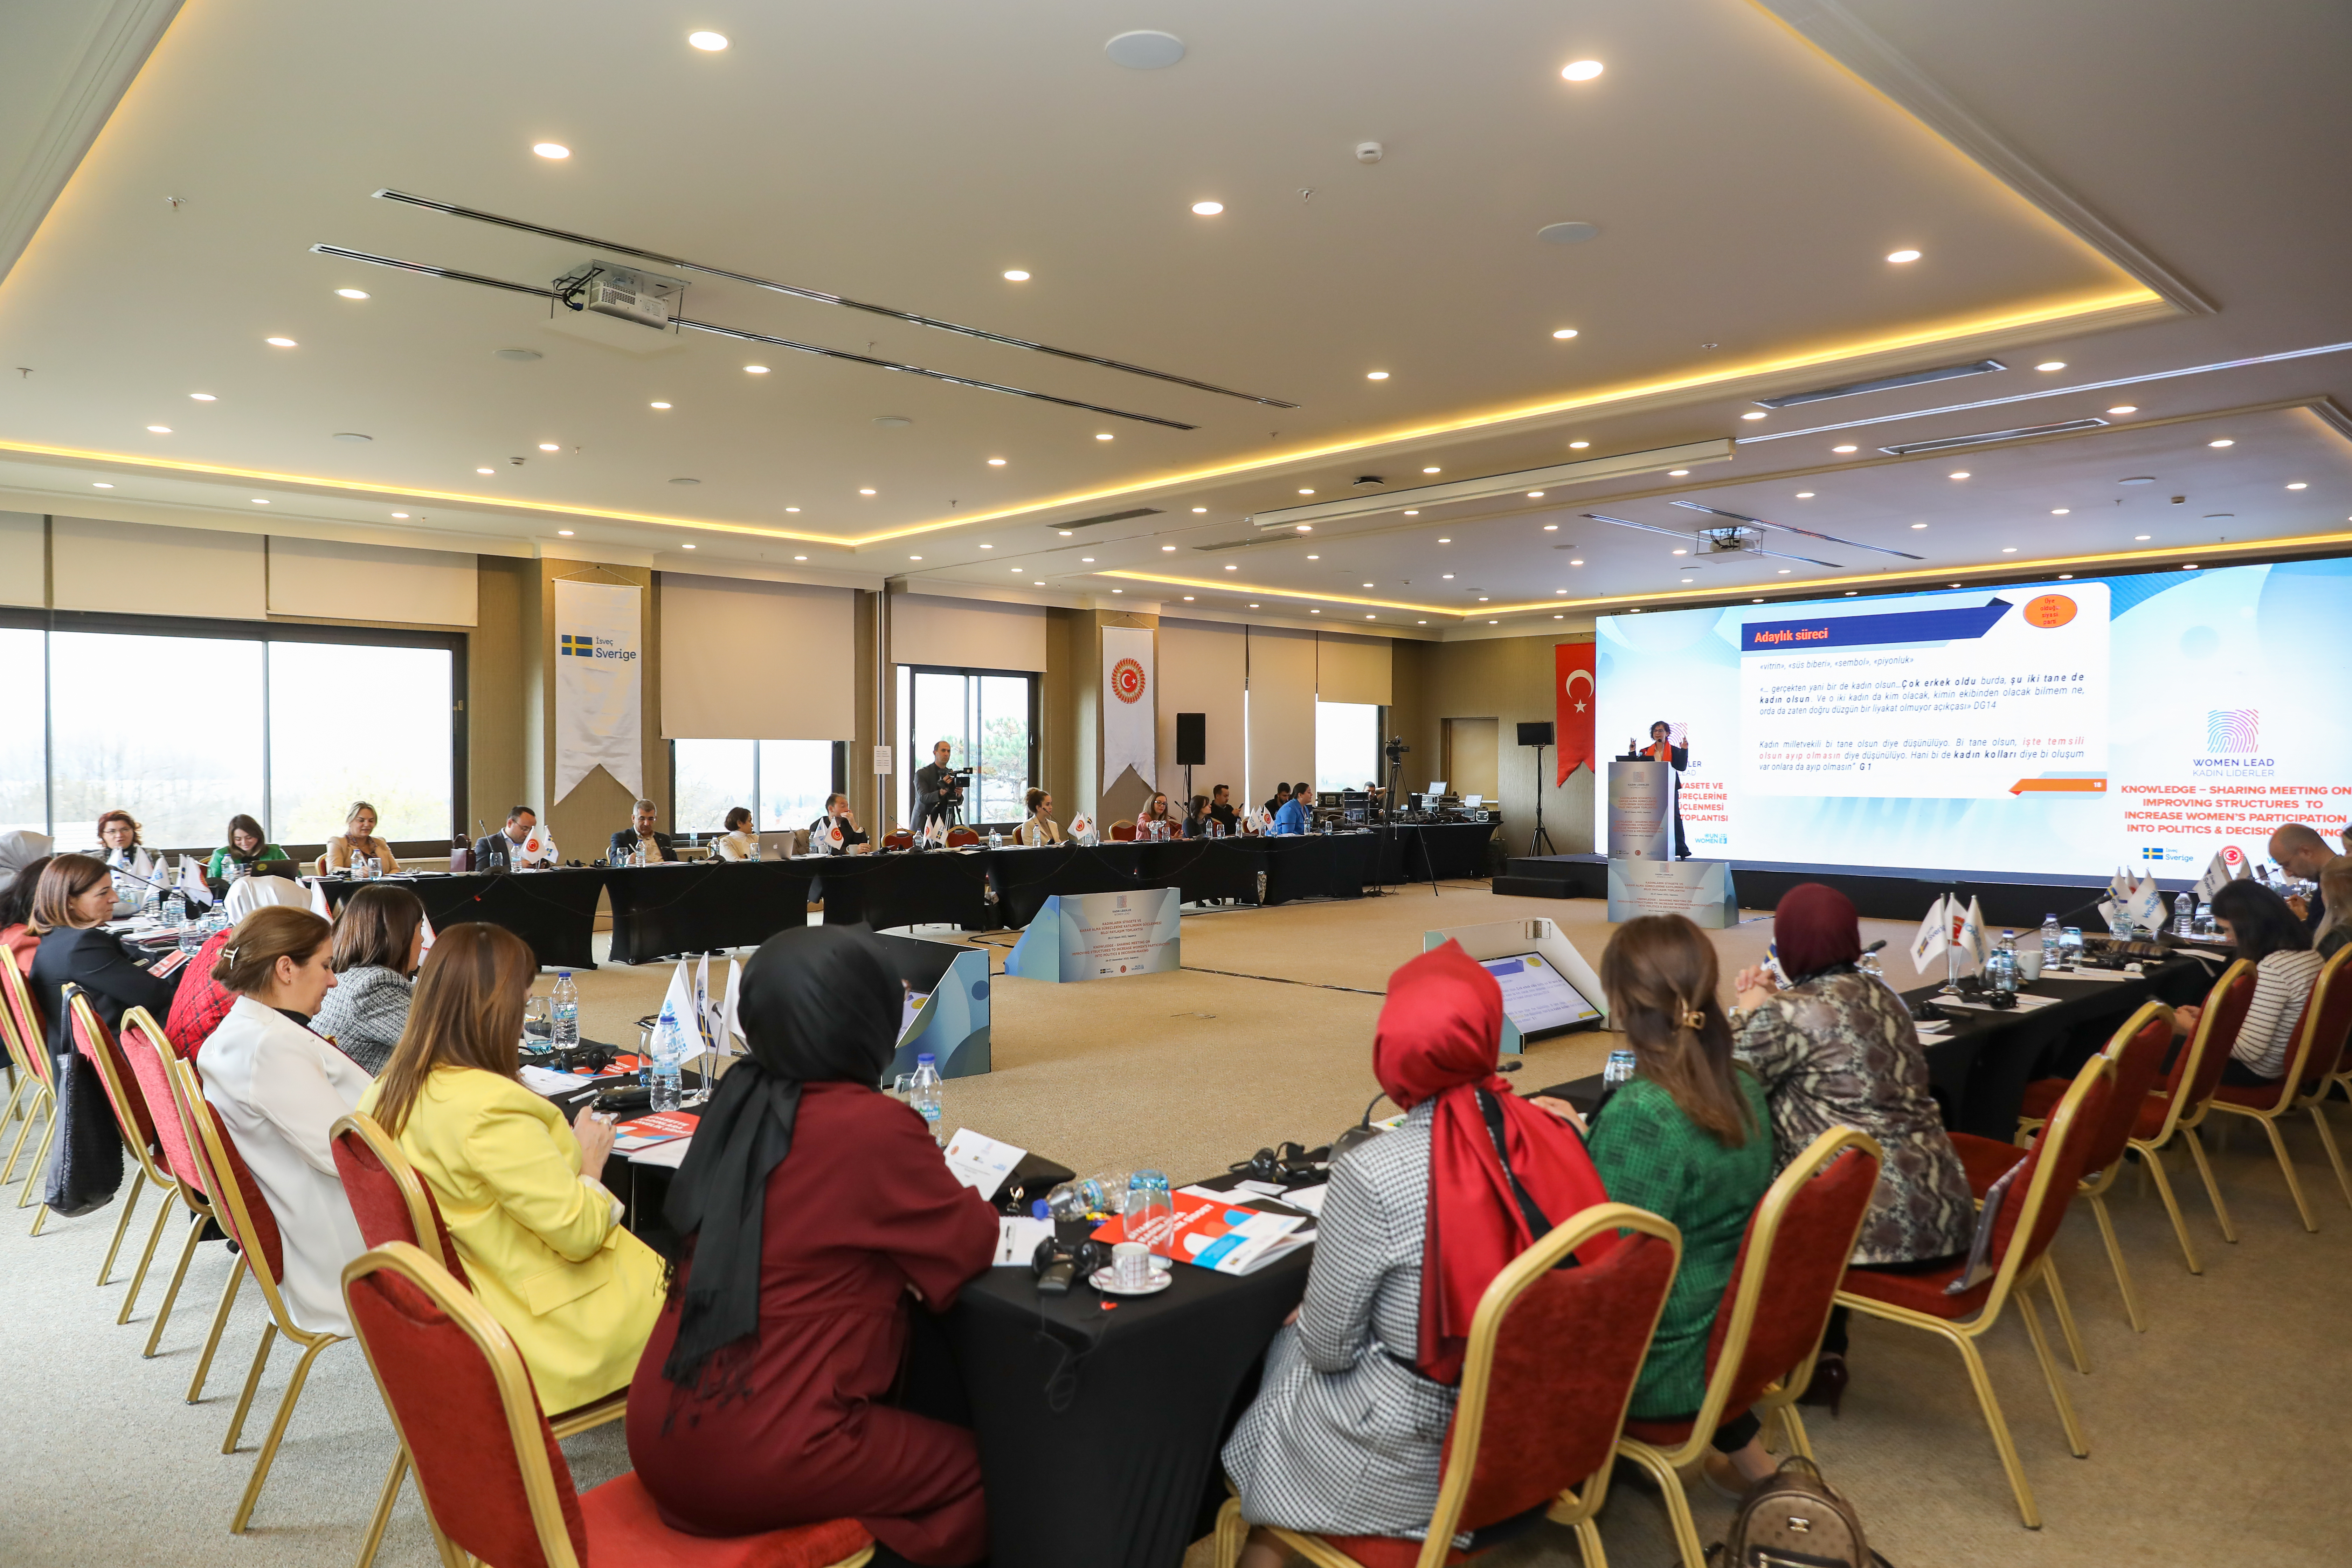 UN Women Türkiye conducted a “Knowledge-sharing Meeting on Improving Structures to Increase Women’s Participation in Politics and Decision-making” in November 2022. Photo: UN Women/Ayşe Gültekin